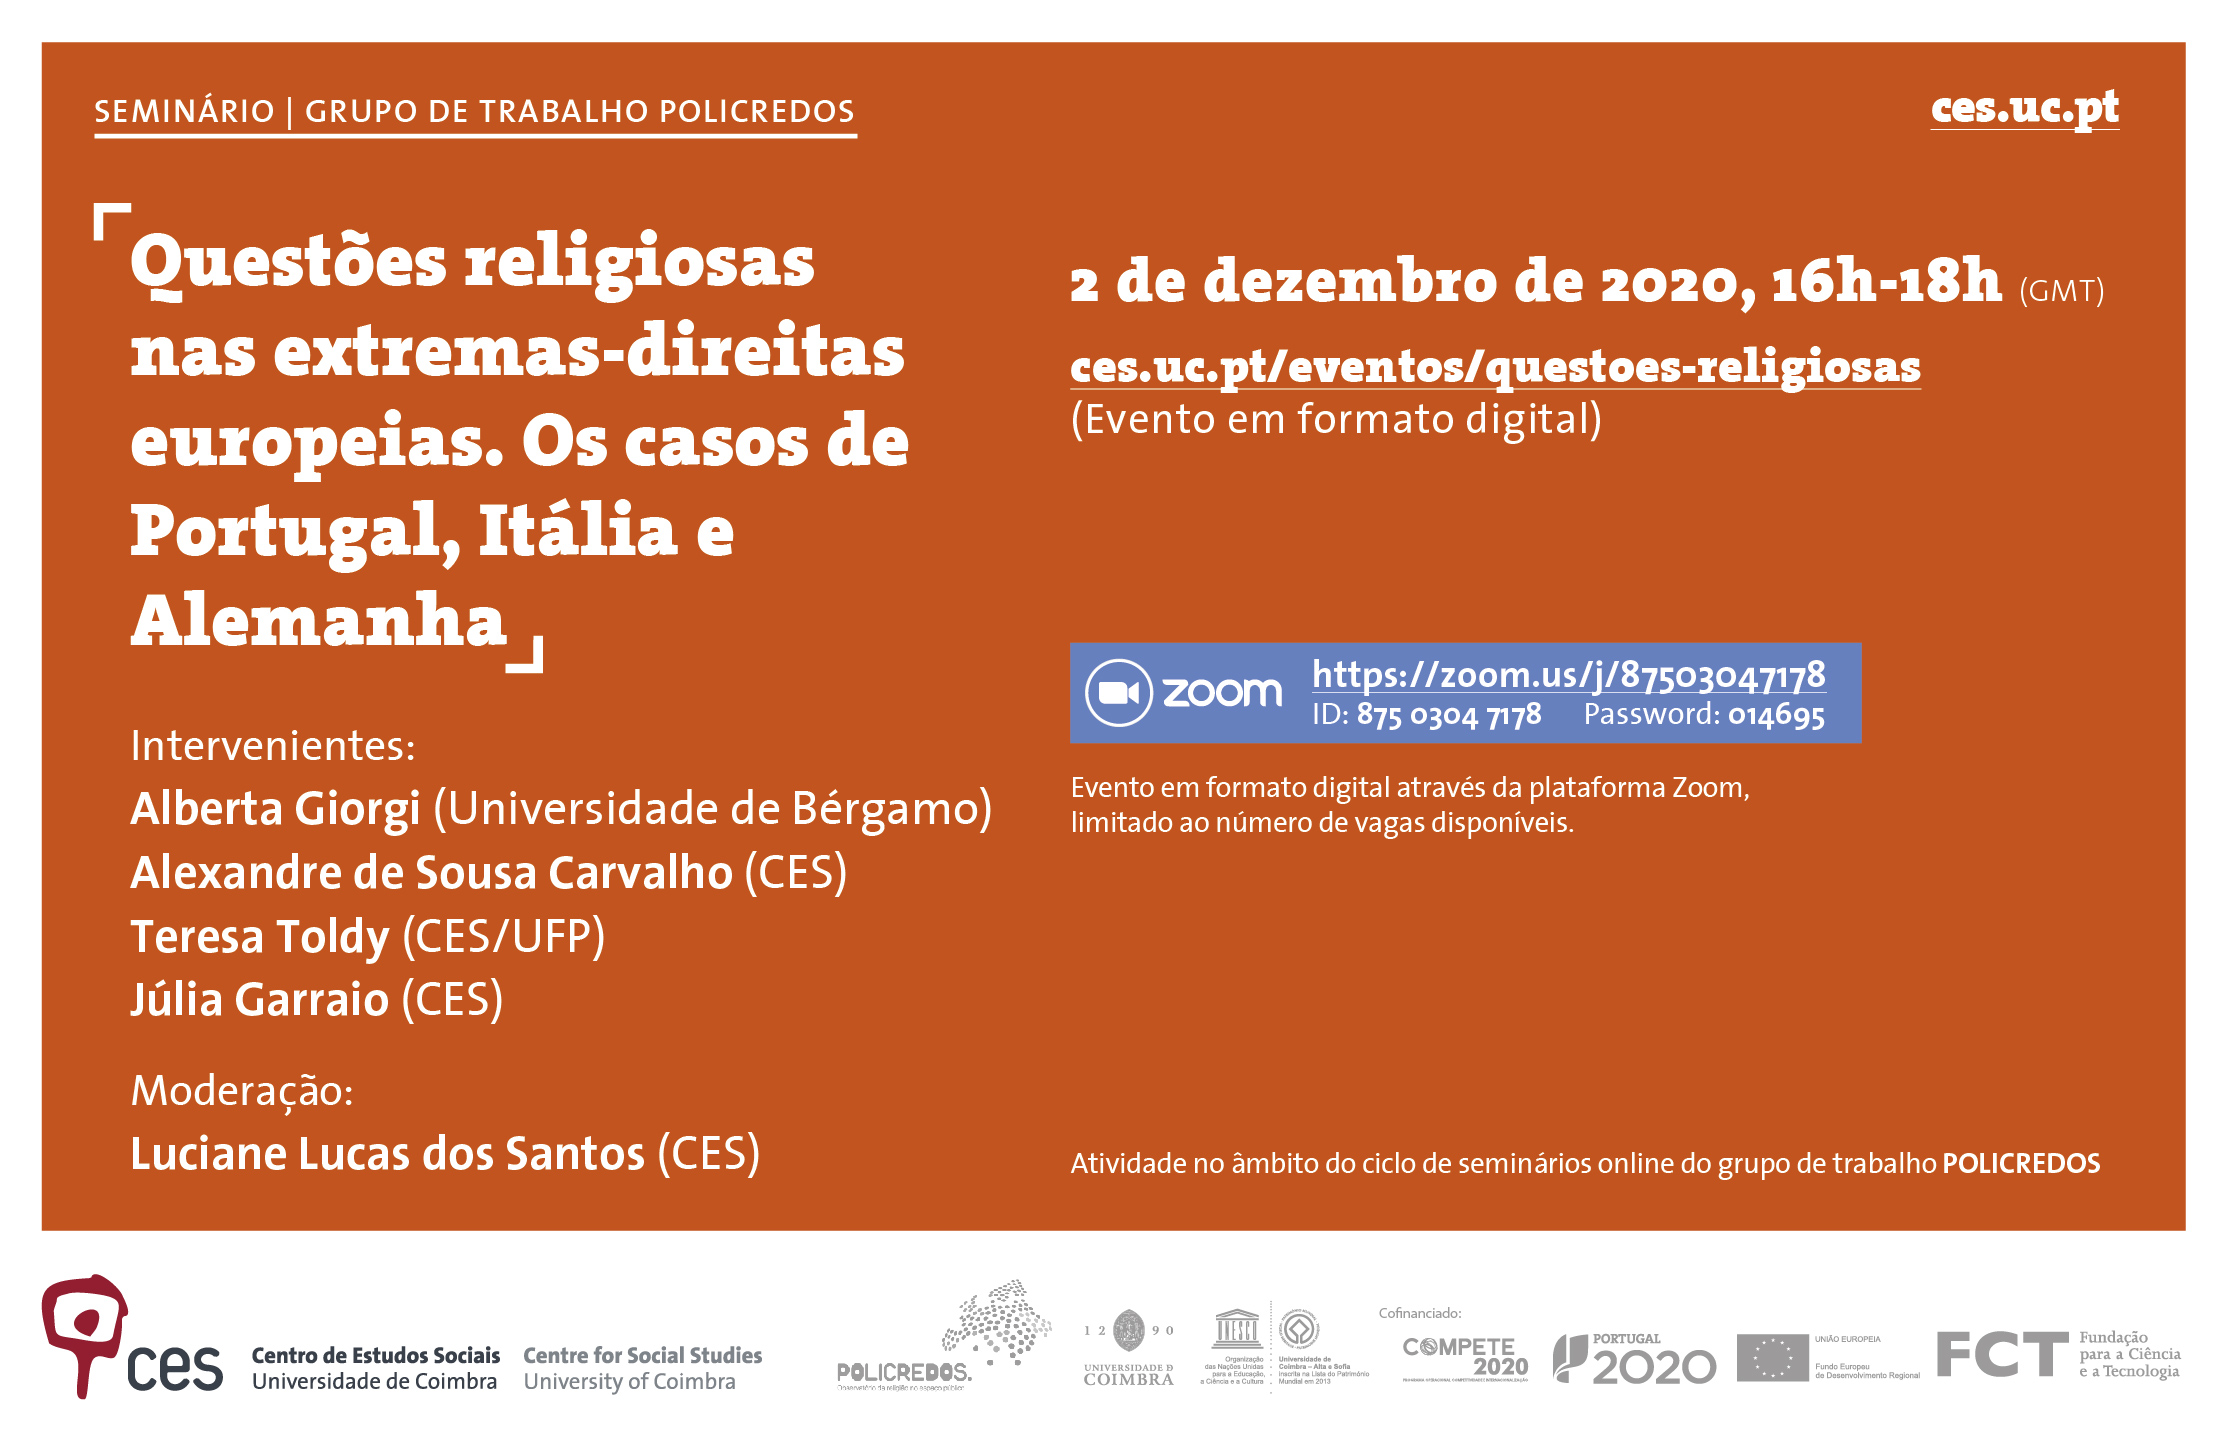 Religious issues in Europe's far right. The cases of Portugal, Italy and Germany<span id="edit_31227"><script>$(function() { $('#edit_31227').load( "/myces/user/editobj.php?tipo=evento&id=31227" ); });</script></span>